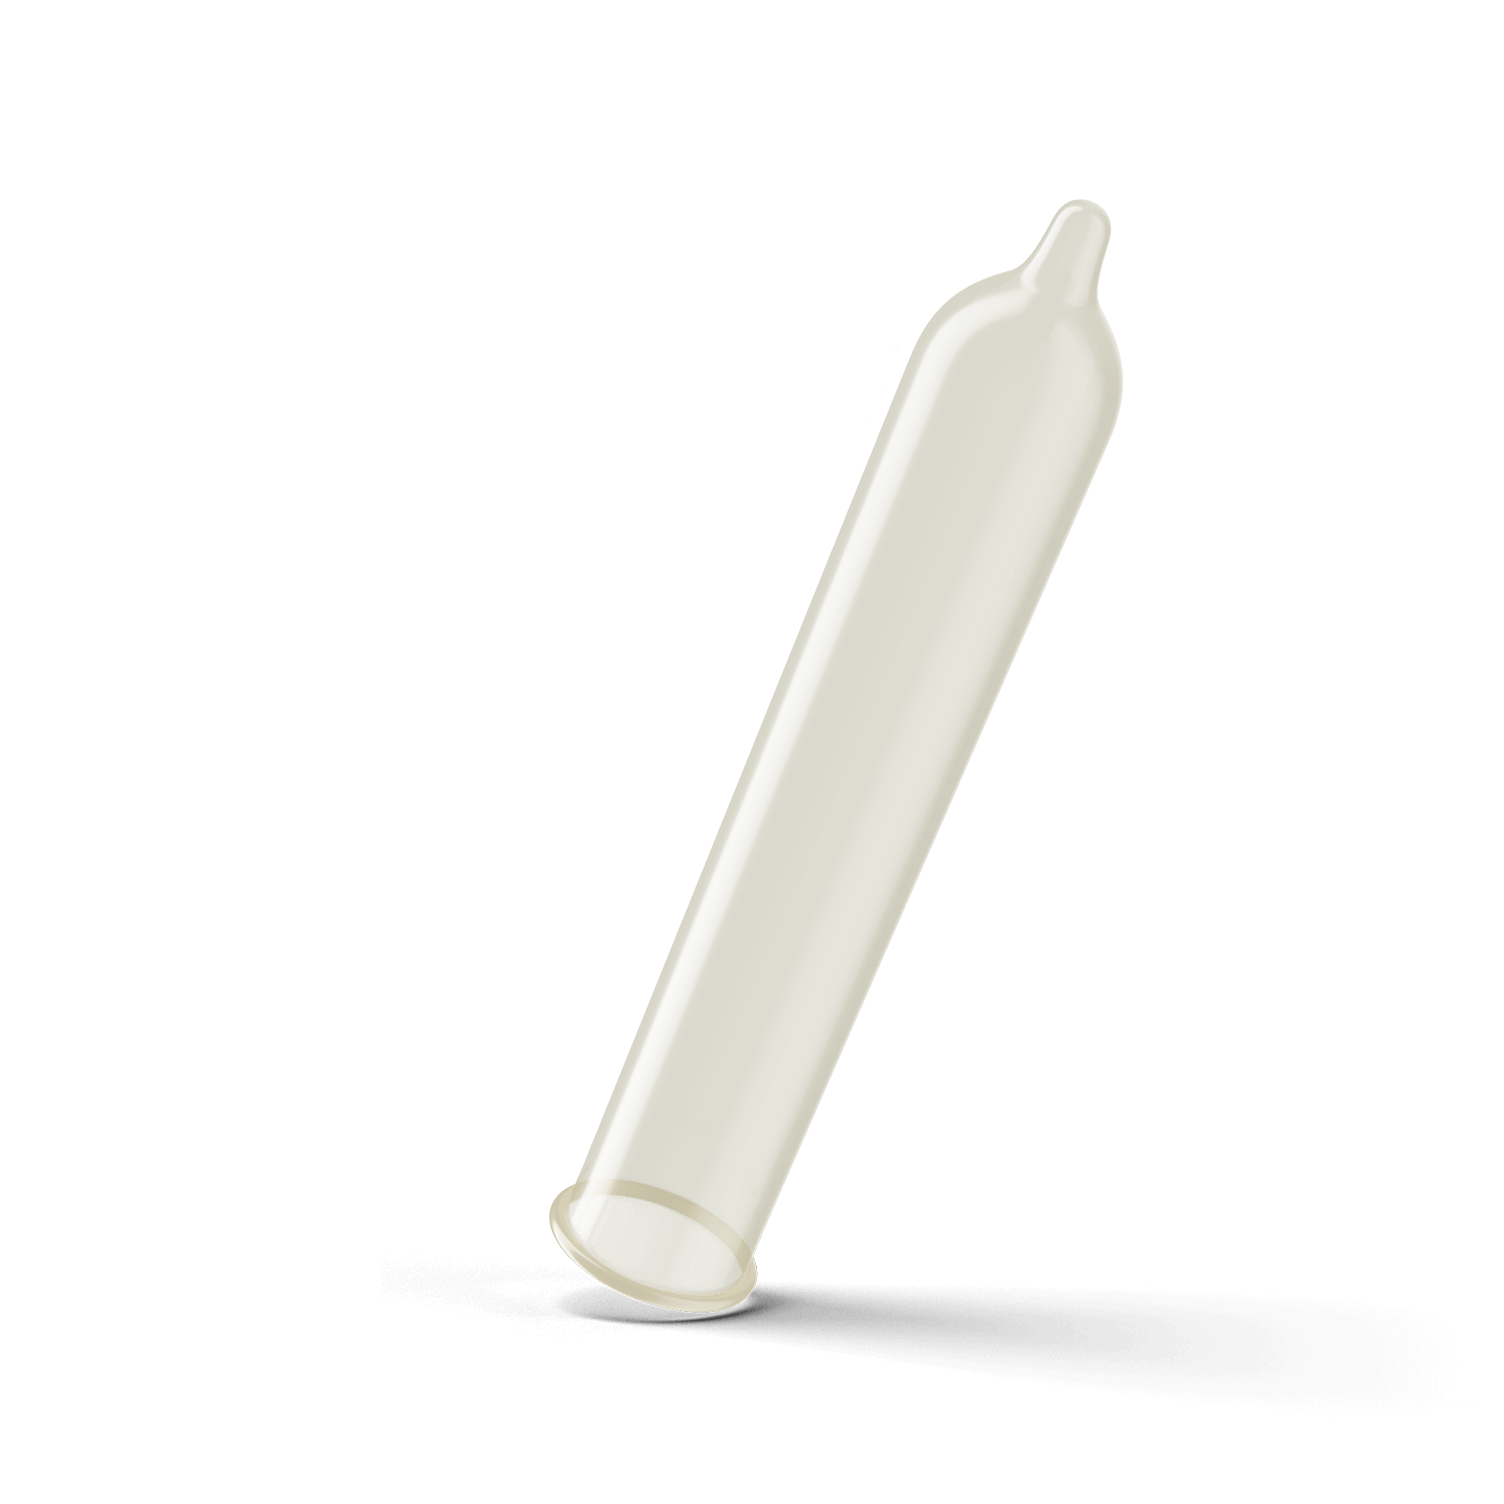 Trojan Ultra Thin straight shaped condom with reservoir tip.